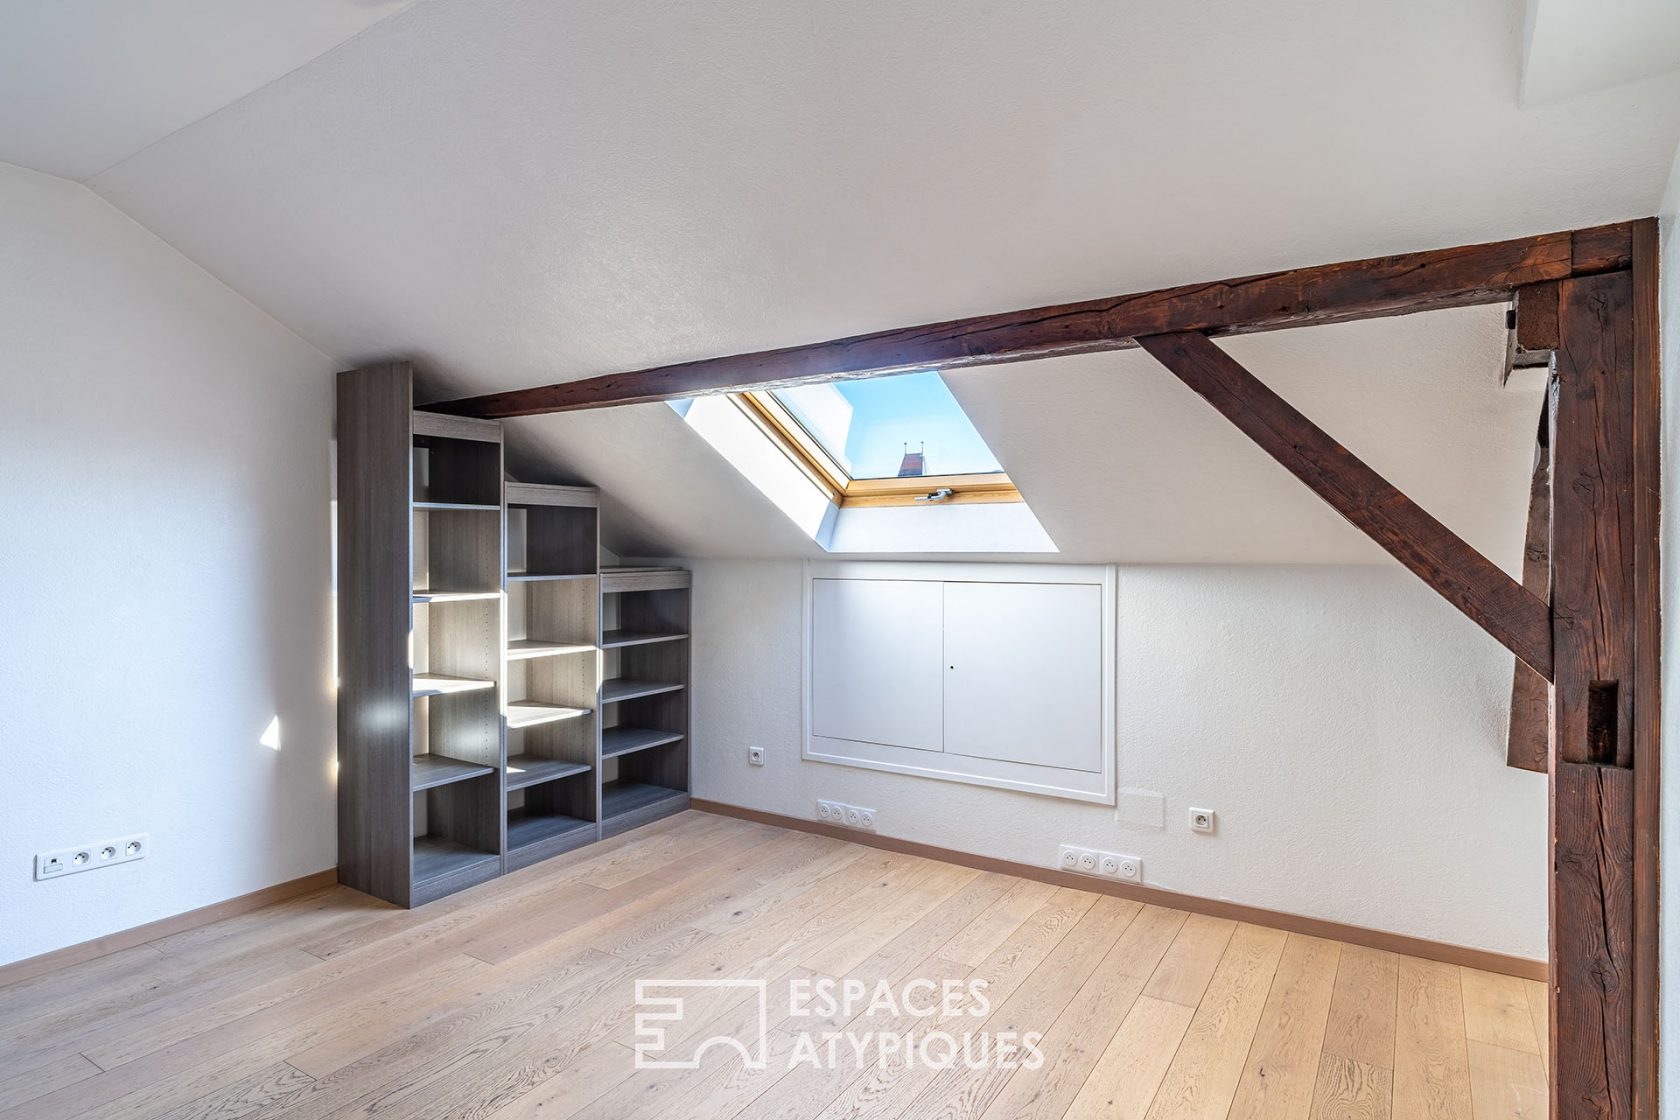 Duplex apartment with rooftop terrace in the heart of the Neustadt